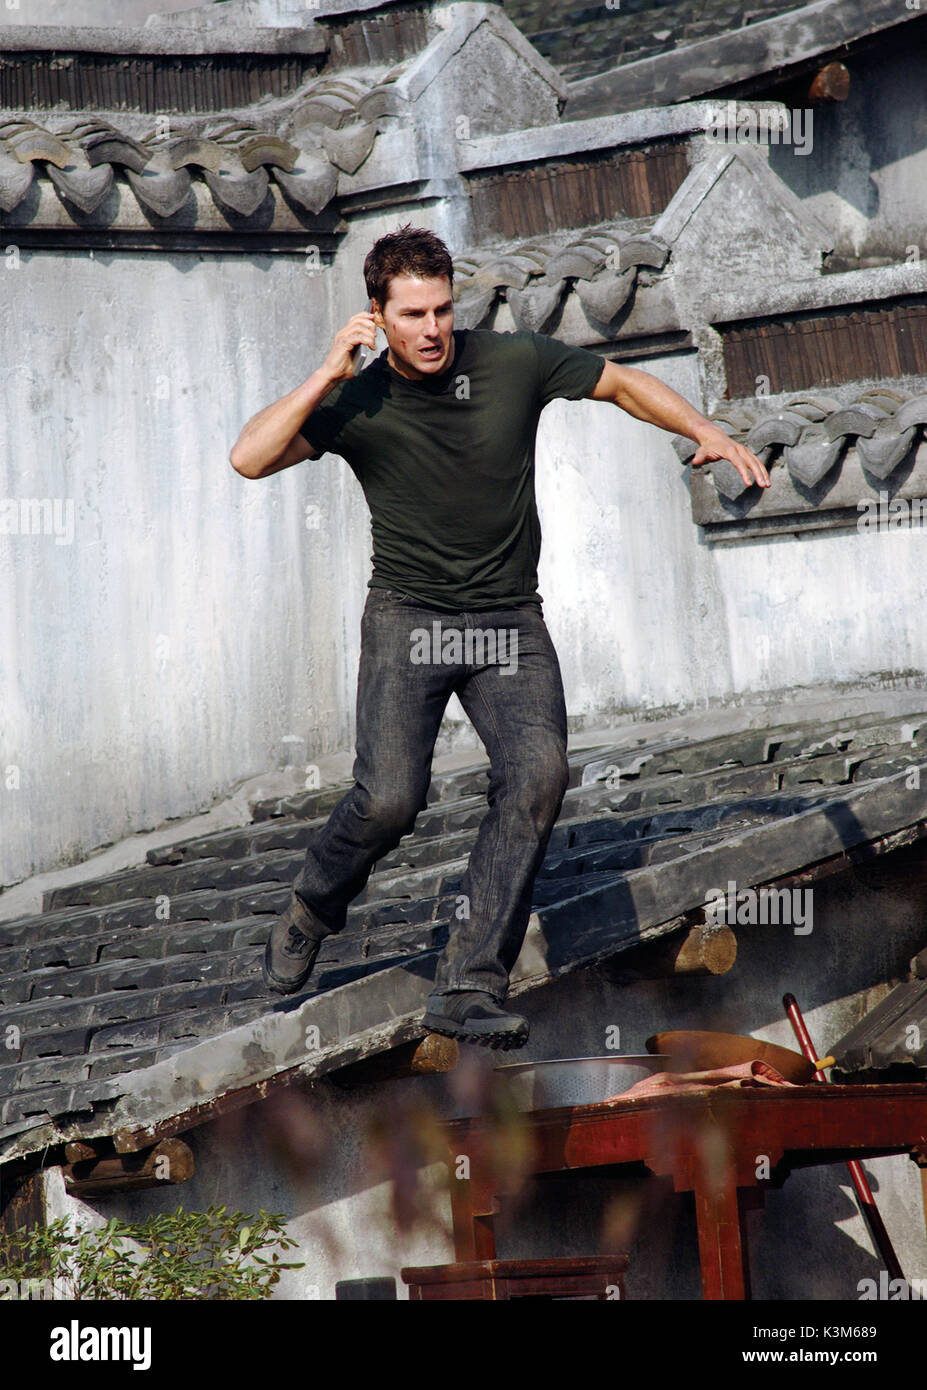 MISSION: IMPOSSIBLE III TOM CRUISE as Ethan Hunt MISSION: IMPOSSIBLE III  Date: 2006 Stock Photo - Alamy